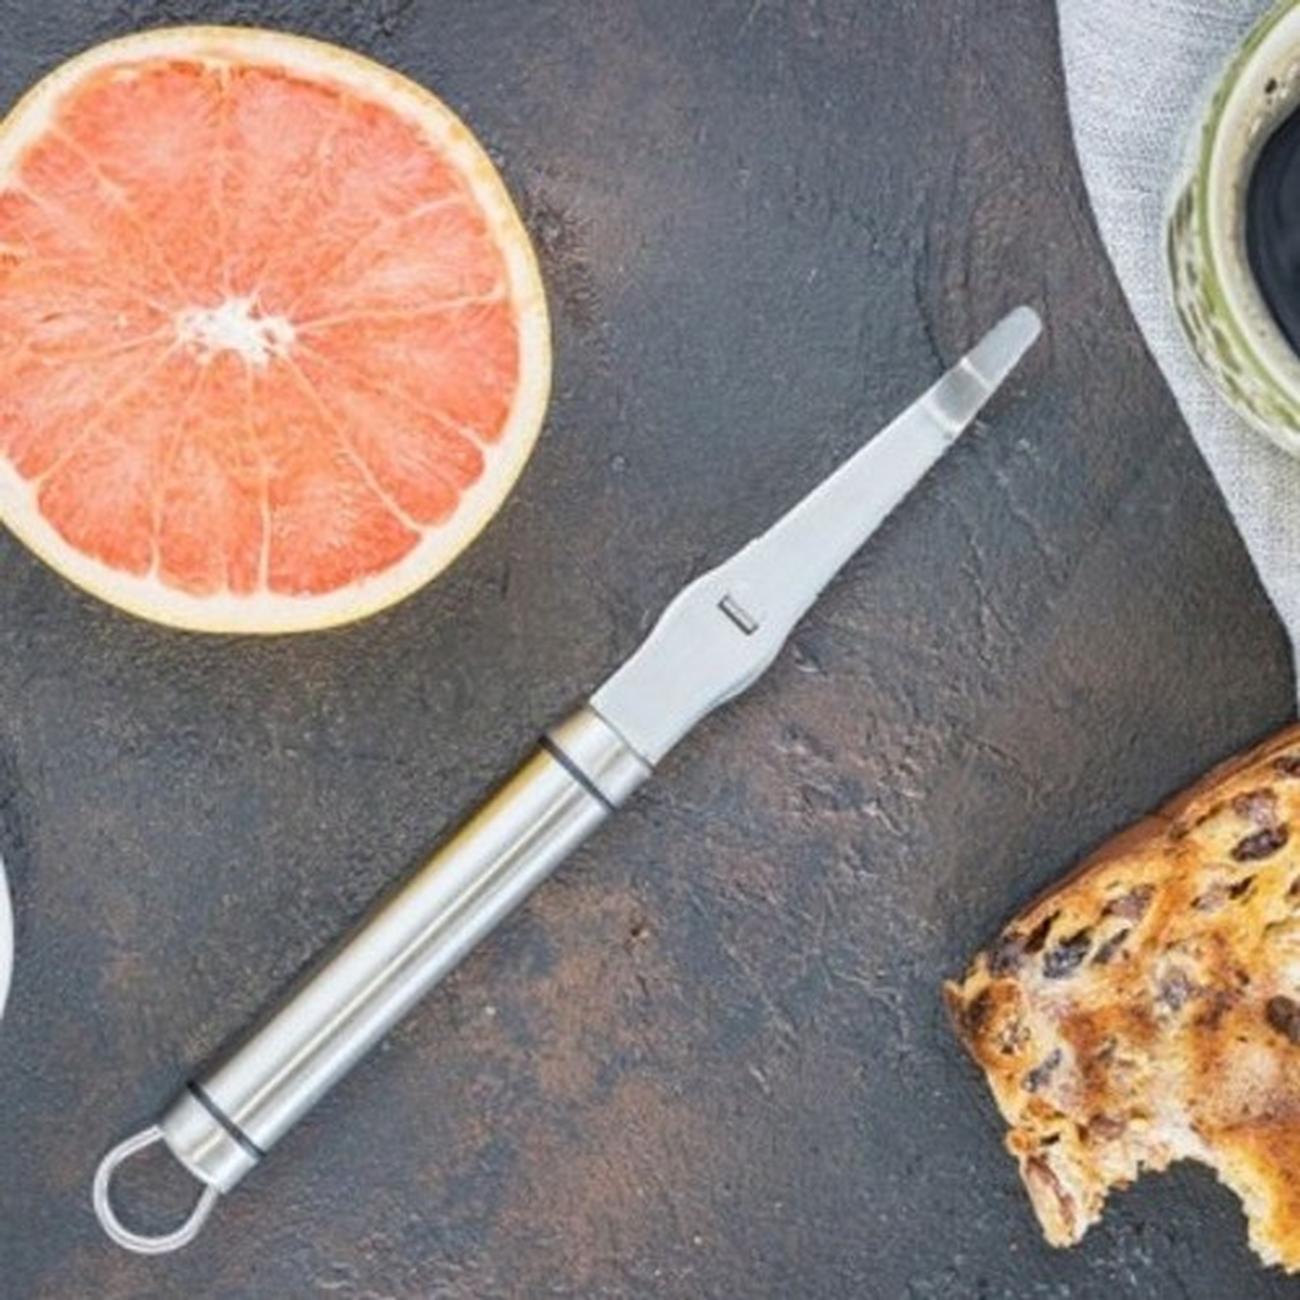 https://www.thekitchenwhisk.ie/contentfiles/productImages/Large/kc-stainlesssteel-grapefruit-knife3.jpg